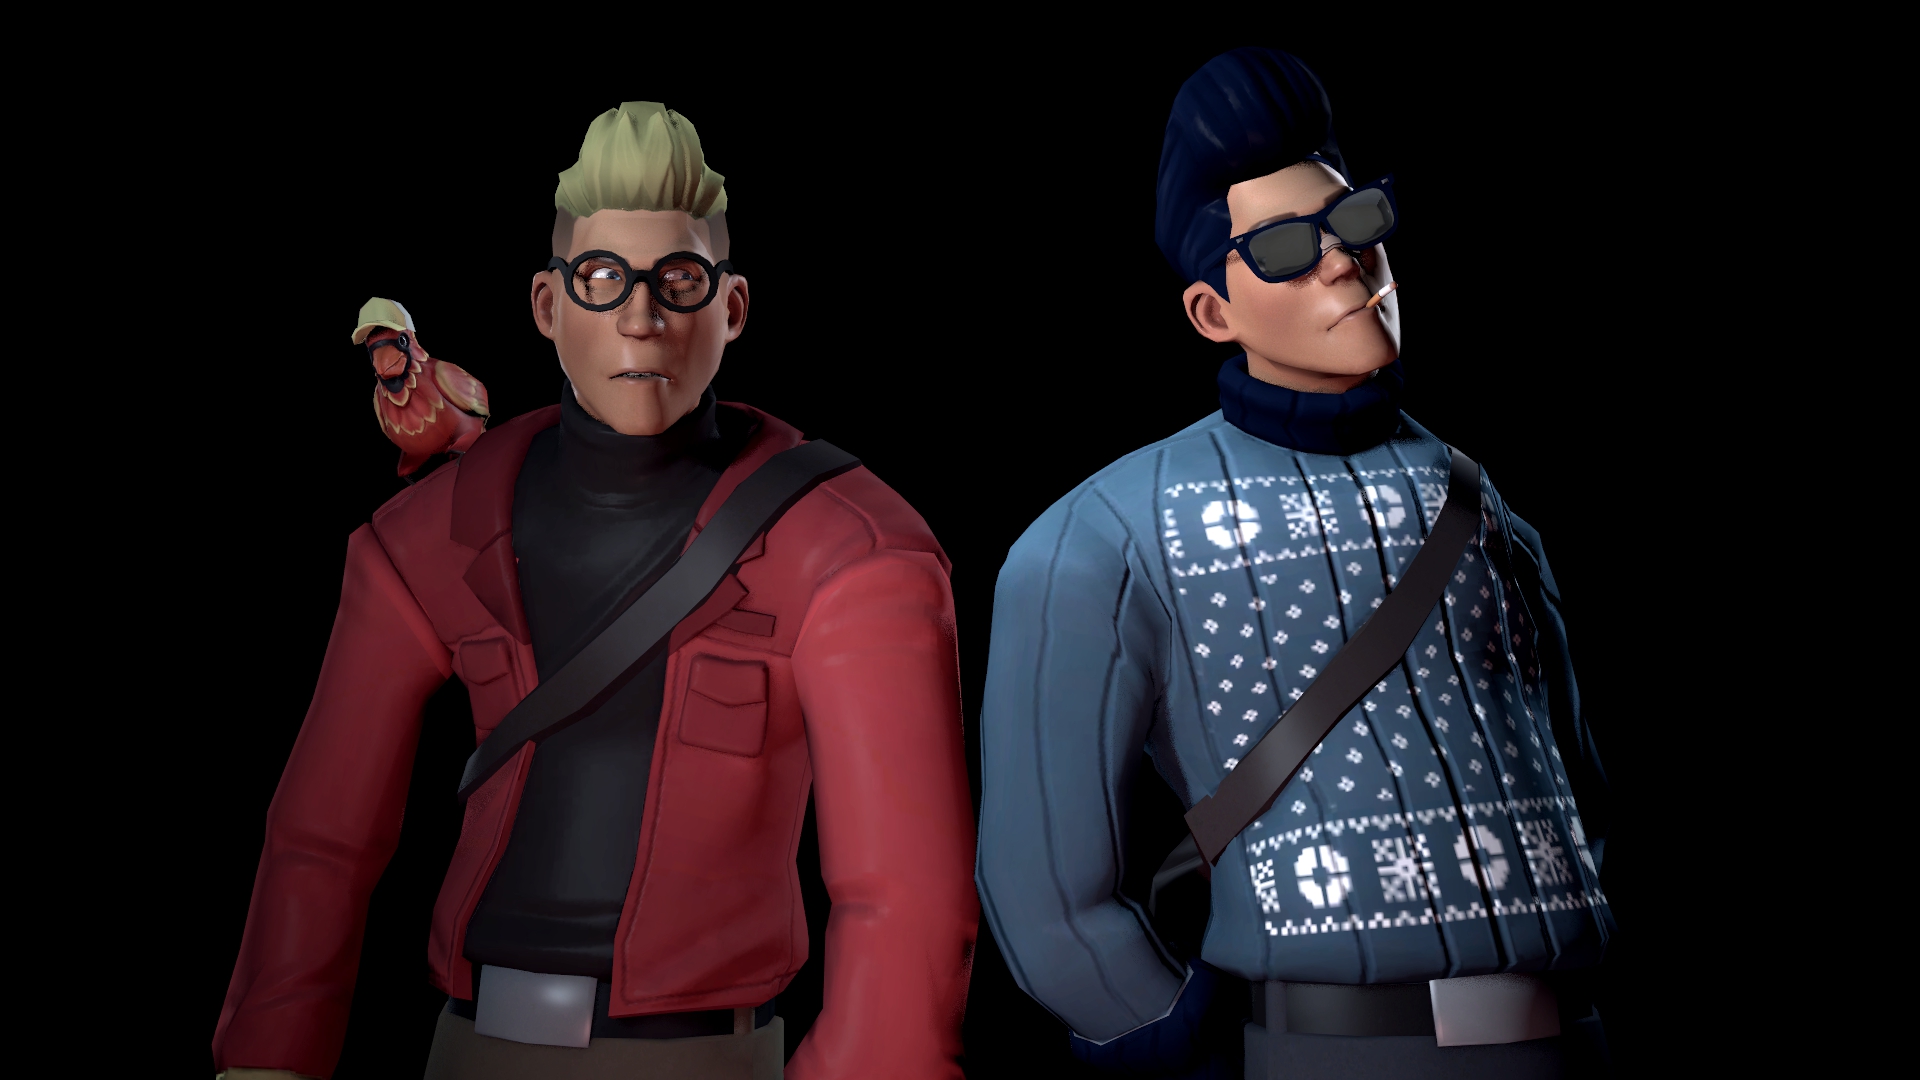 Towering Pillar of Beanies - Official TF2 Wiki